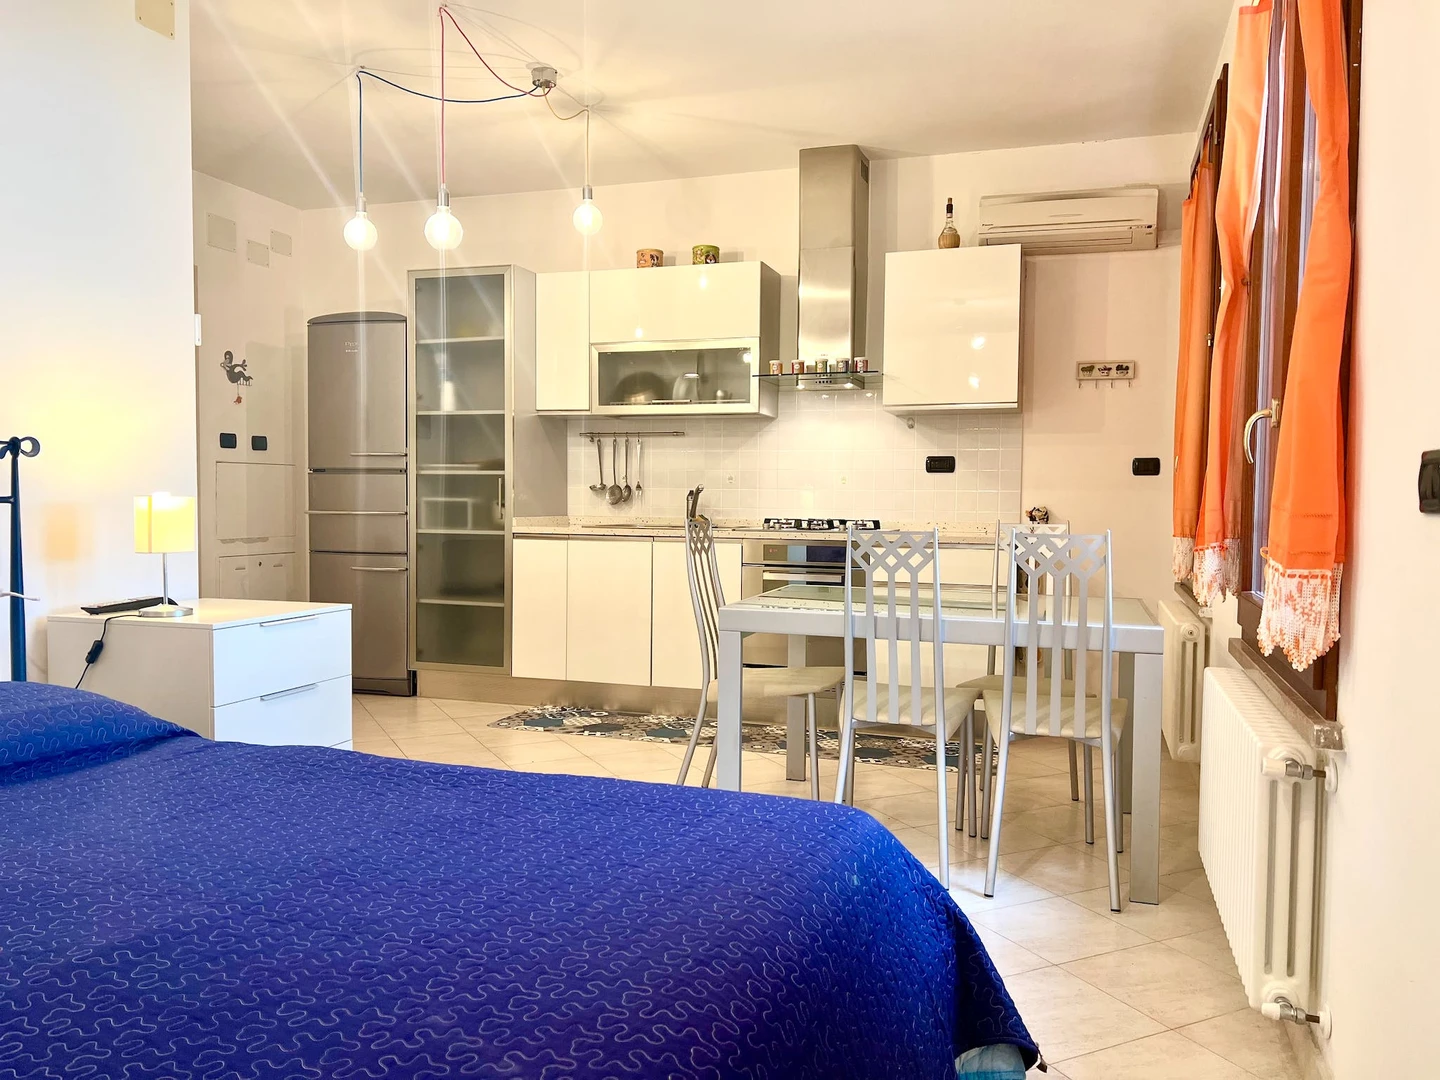 Accommodation in the centre of Siena